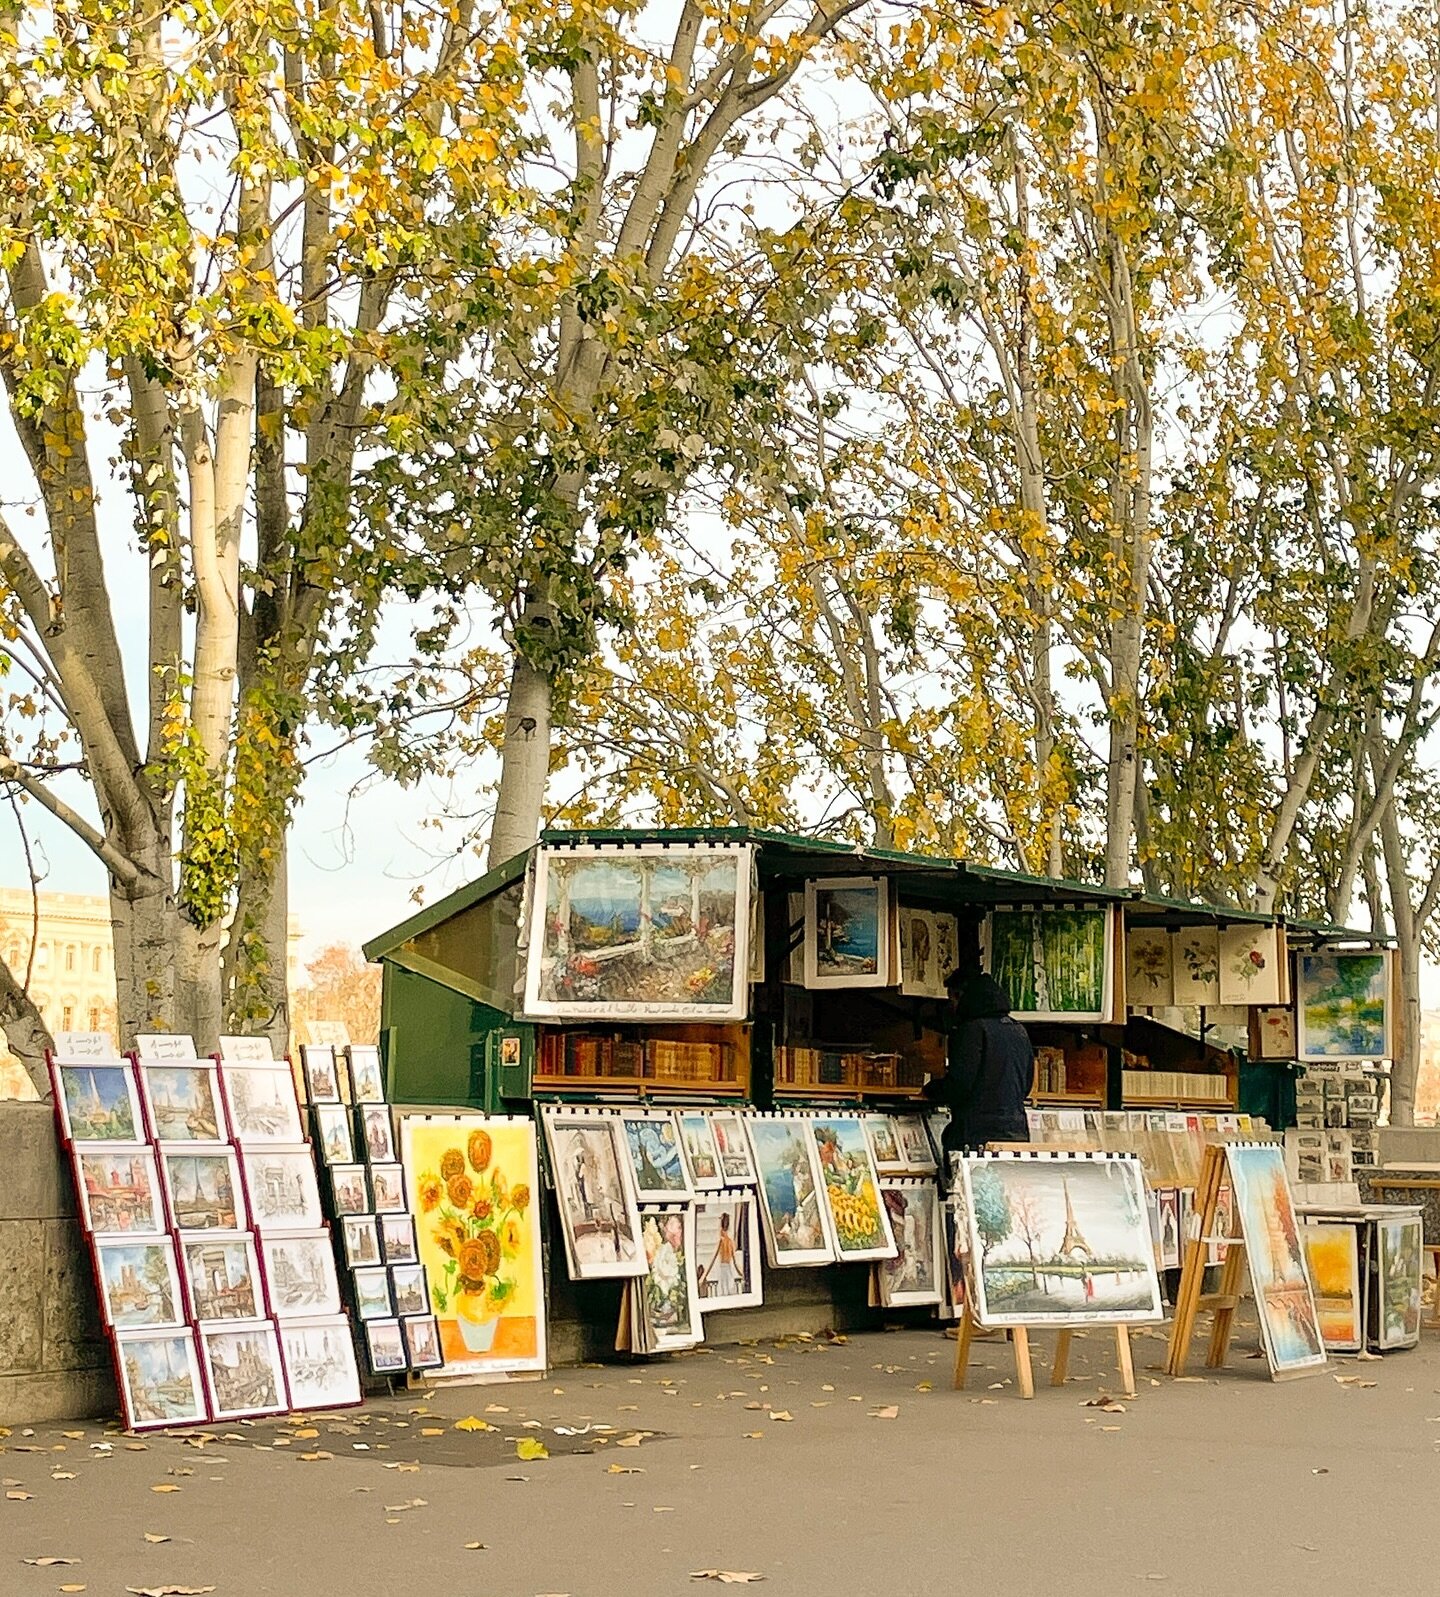 good news in Paris this week ~ les bouquinistes {the second hand booksellers} that have been a fixture in Paris along the Seine since 1859 are now allowed to stay during the Olympics! 📚 
They were going to be temporarily moved for two weeks due to t